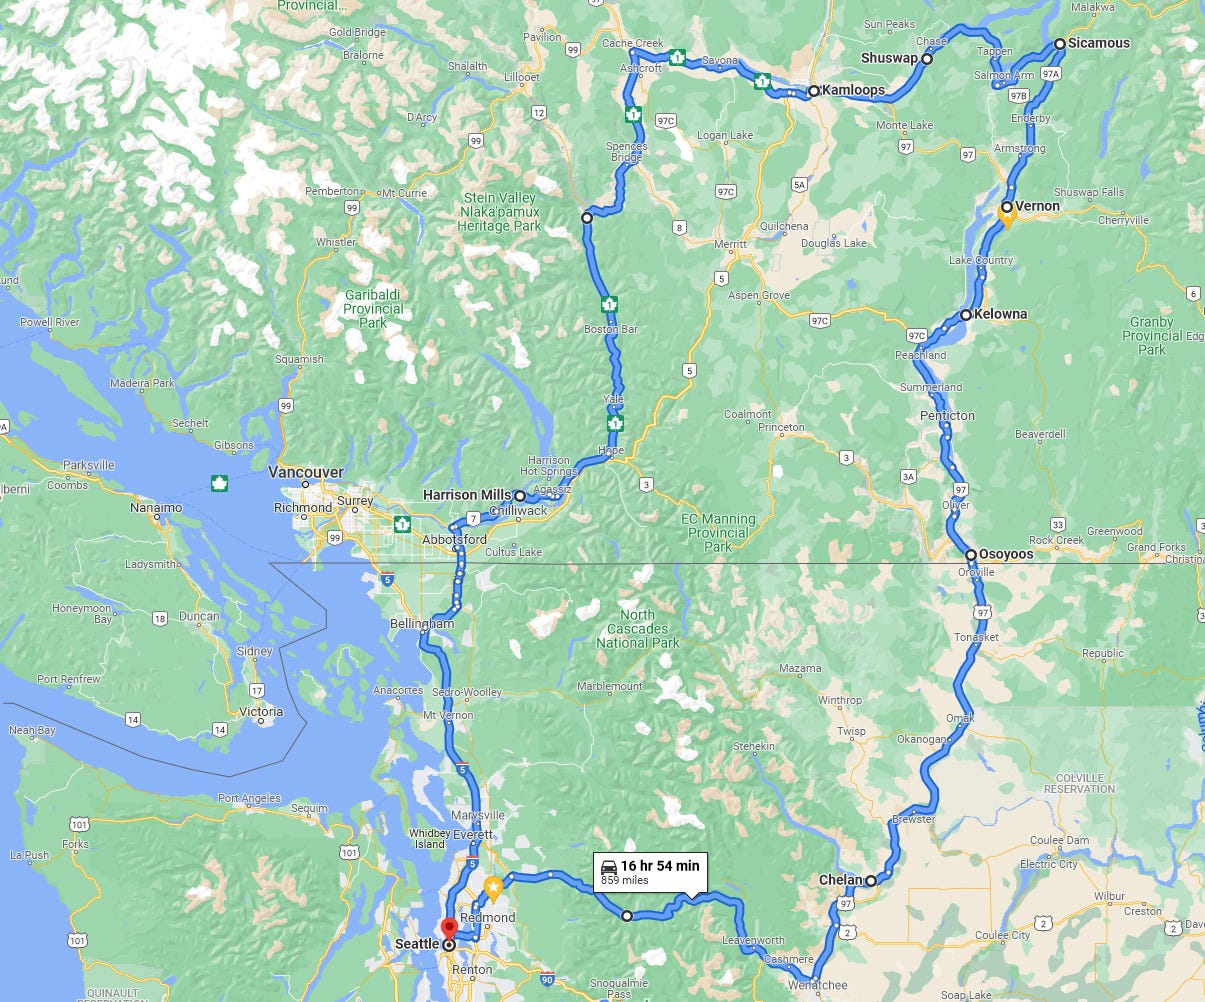 map of road trip loop through British Columbia from Seattle, with stops in Chelan, Osoyoos, Kelowna, Vernon, Shuswap, Kamloops, and the Fraser River Valley